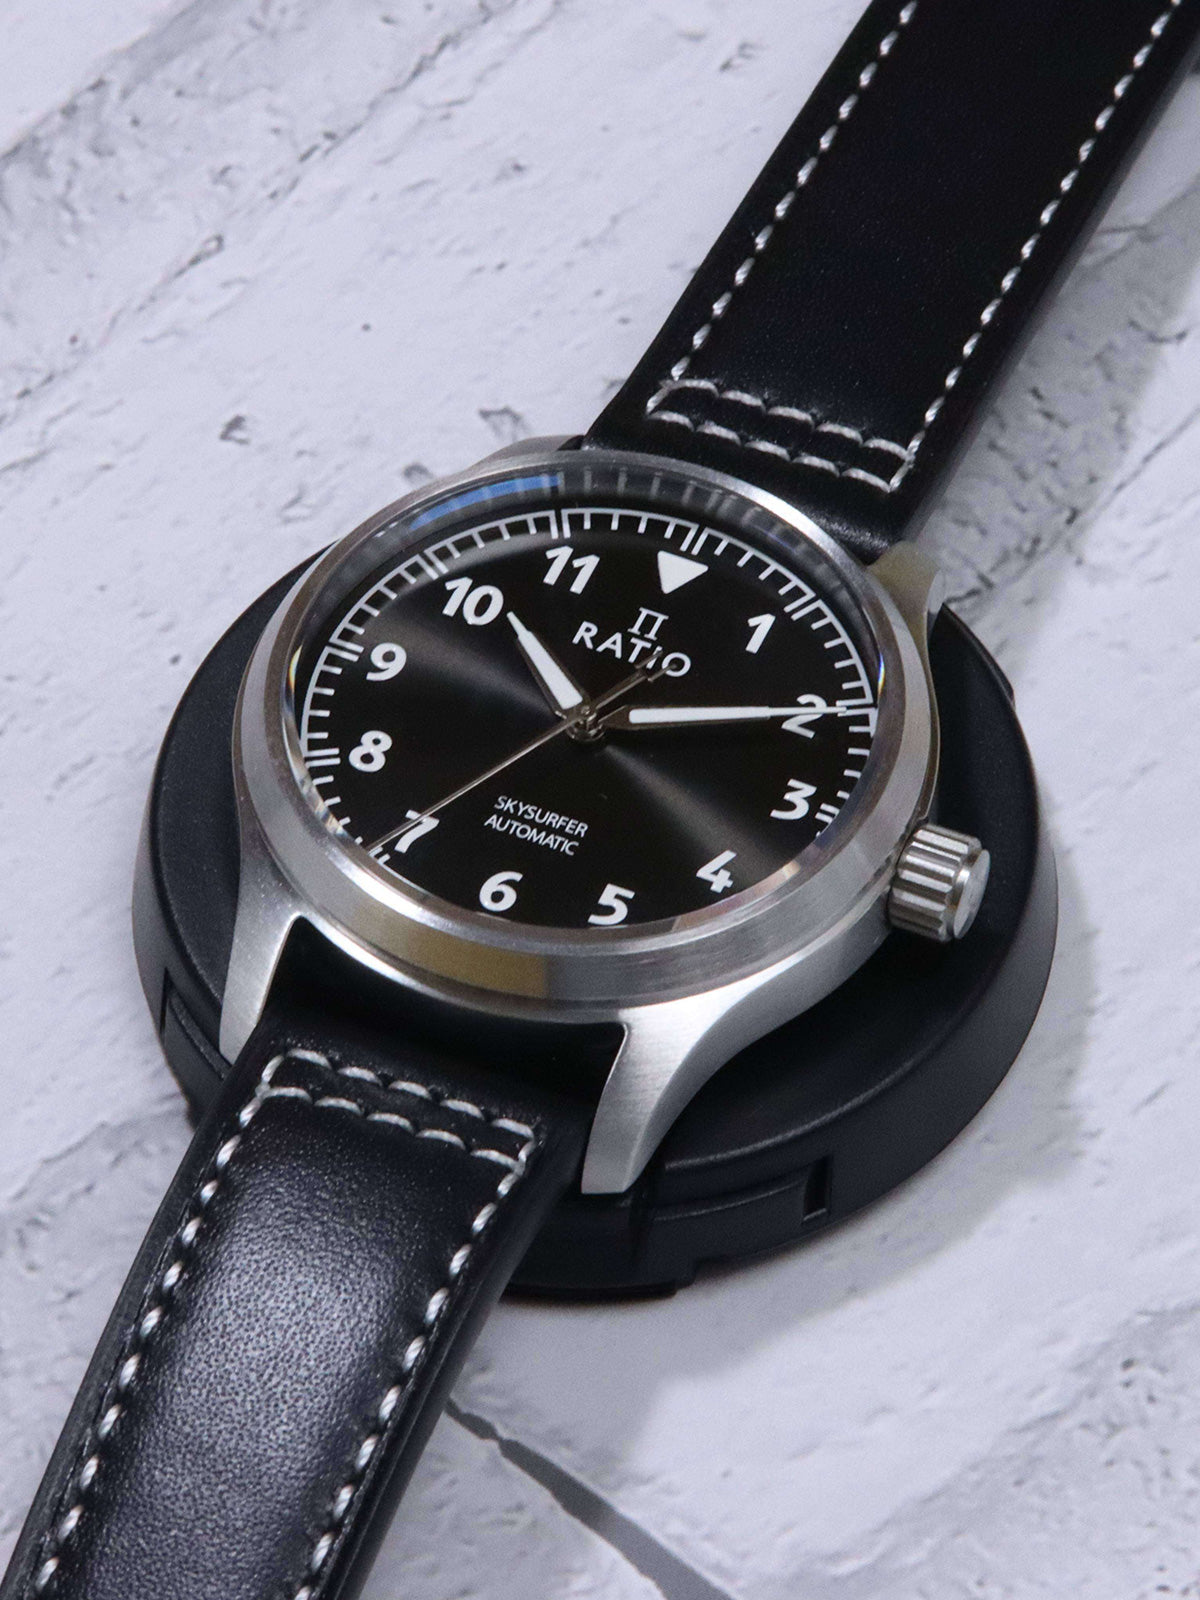 Ratio Skysurfer Pilot Black Sunray Dial Leather Automatic RTS305 200M Mens Watch